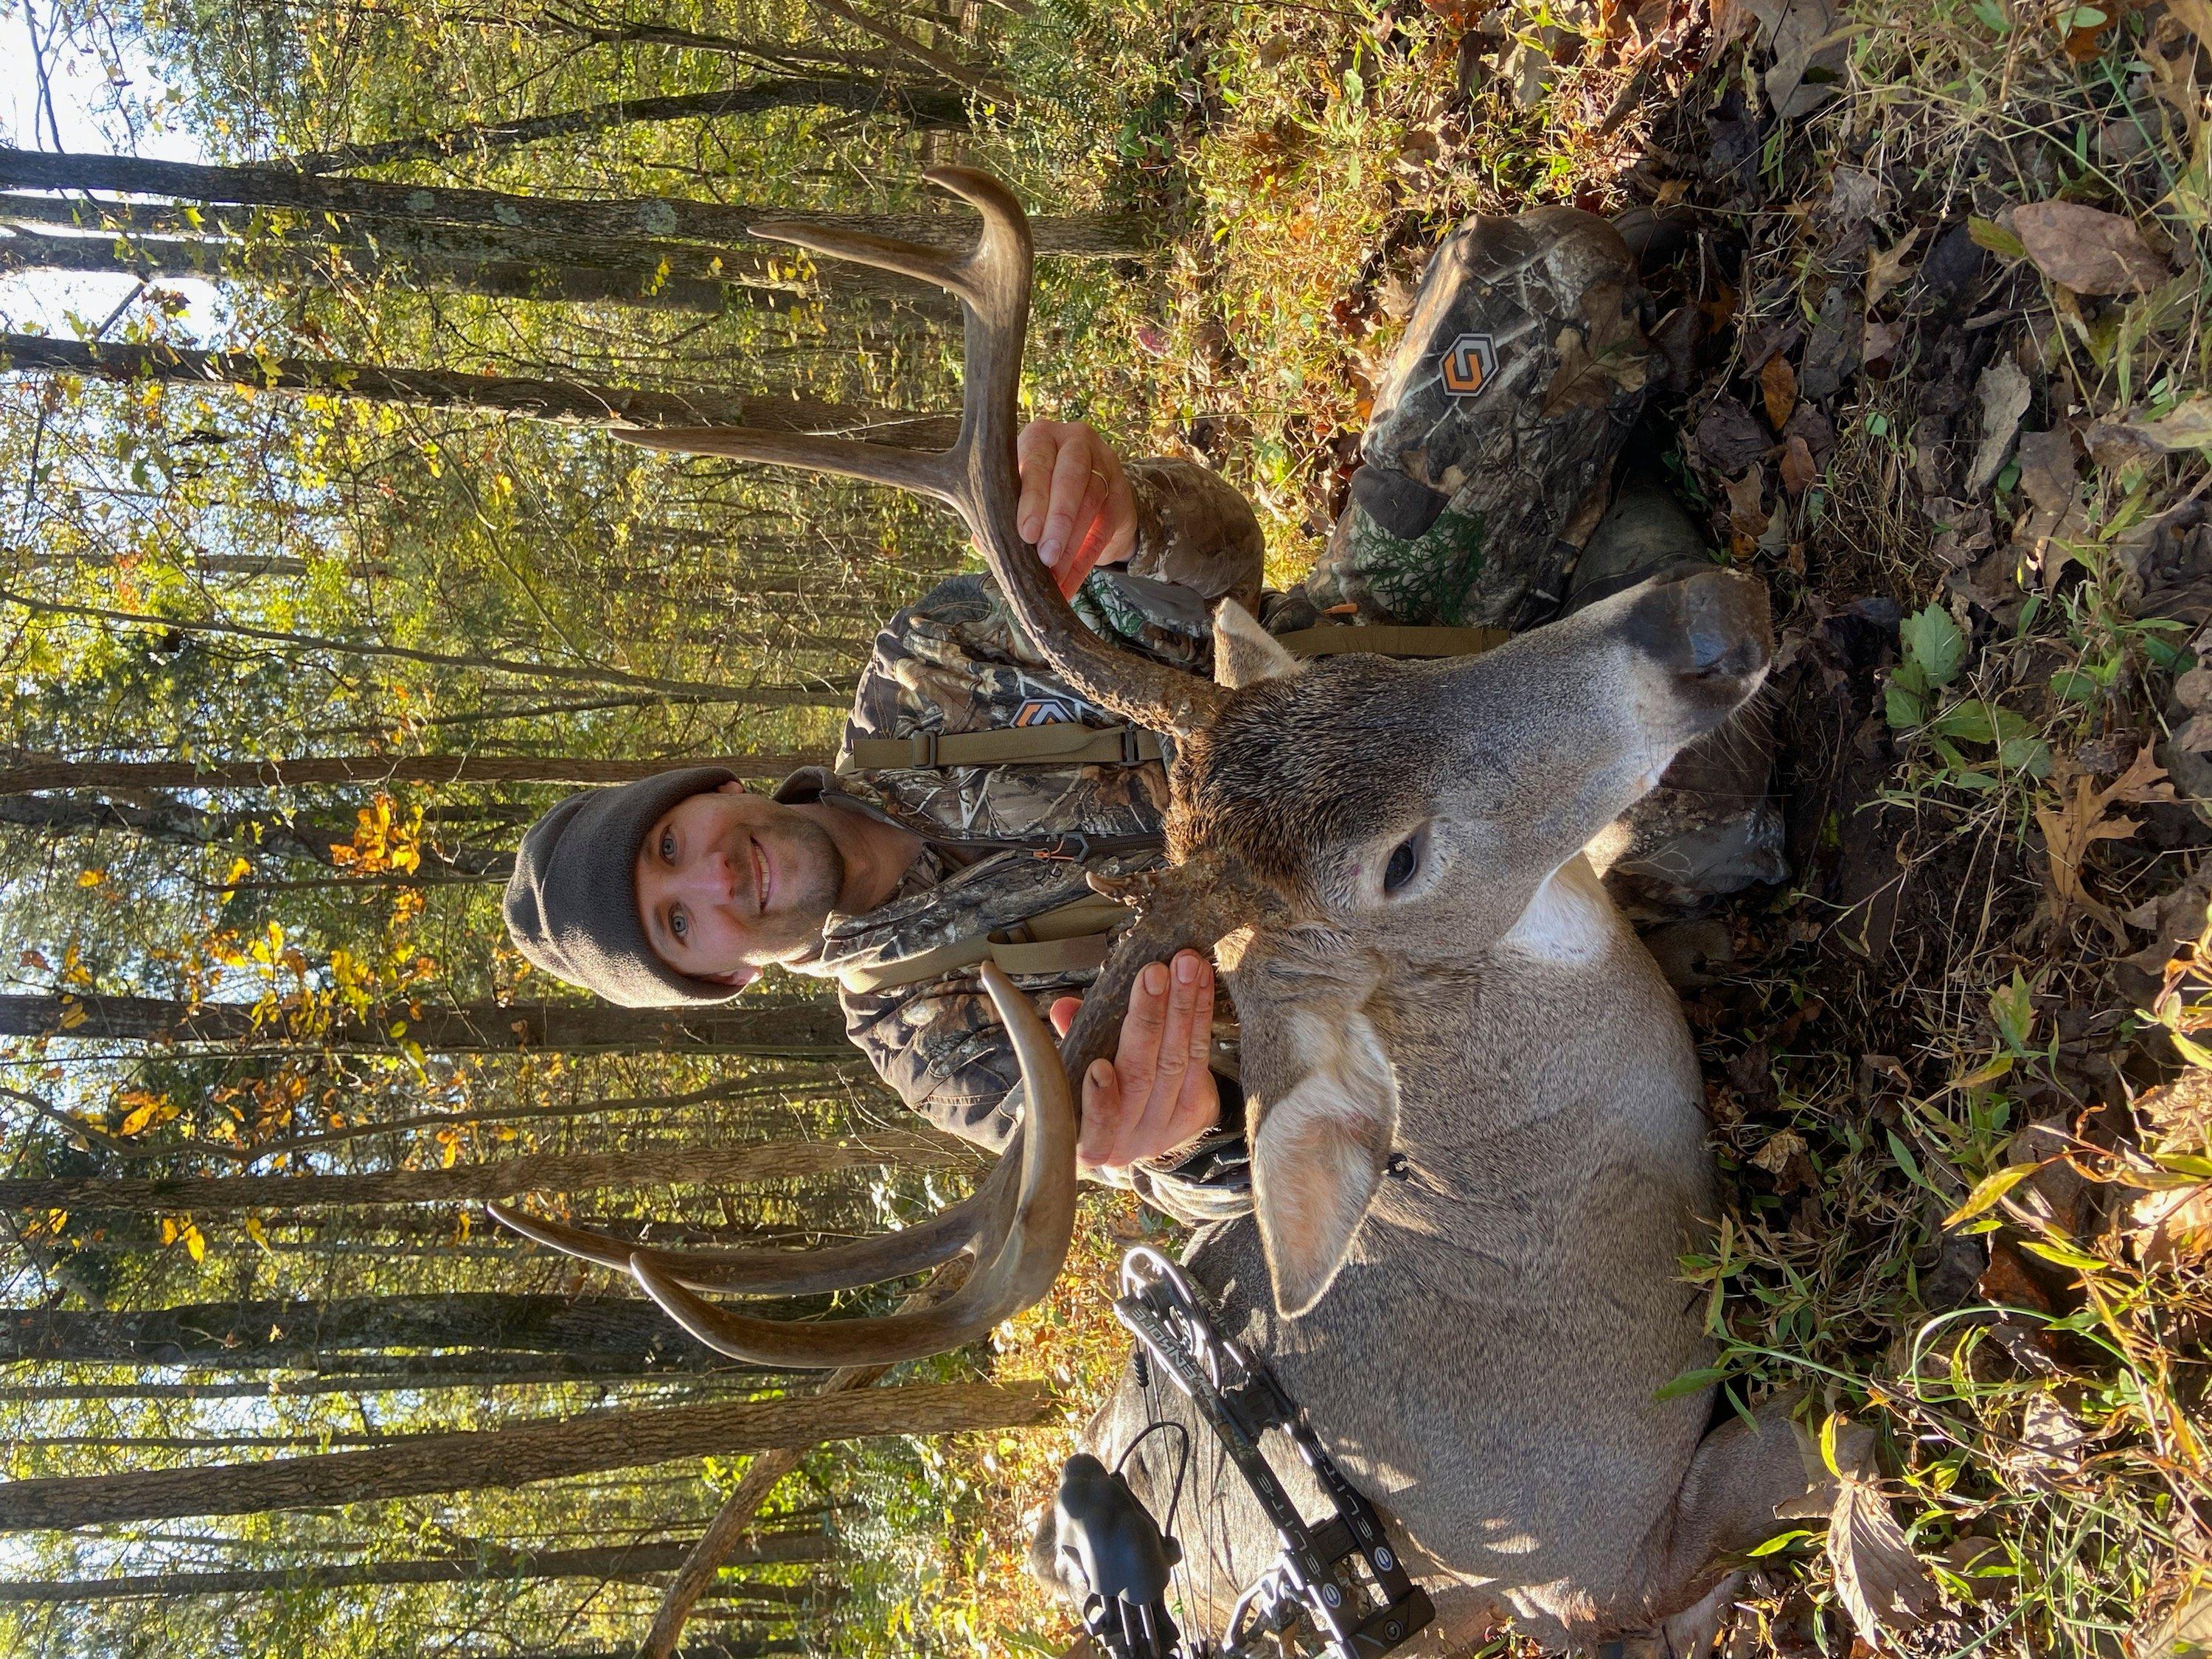 The author with a Tennessee buck, taken after a clean pass-through with a 28-inch, 60-pound bow. Image by Michelle Brantley